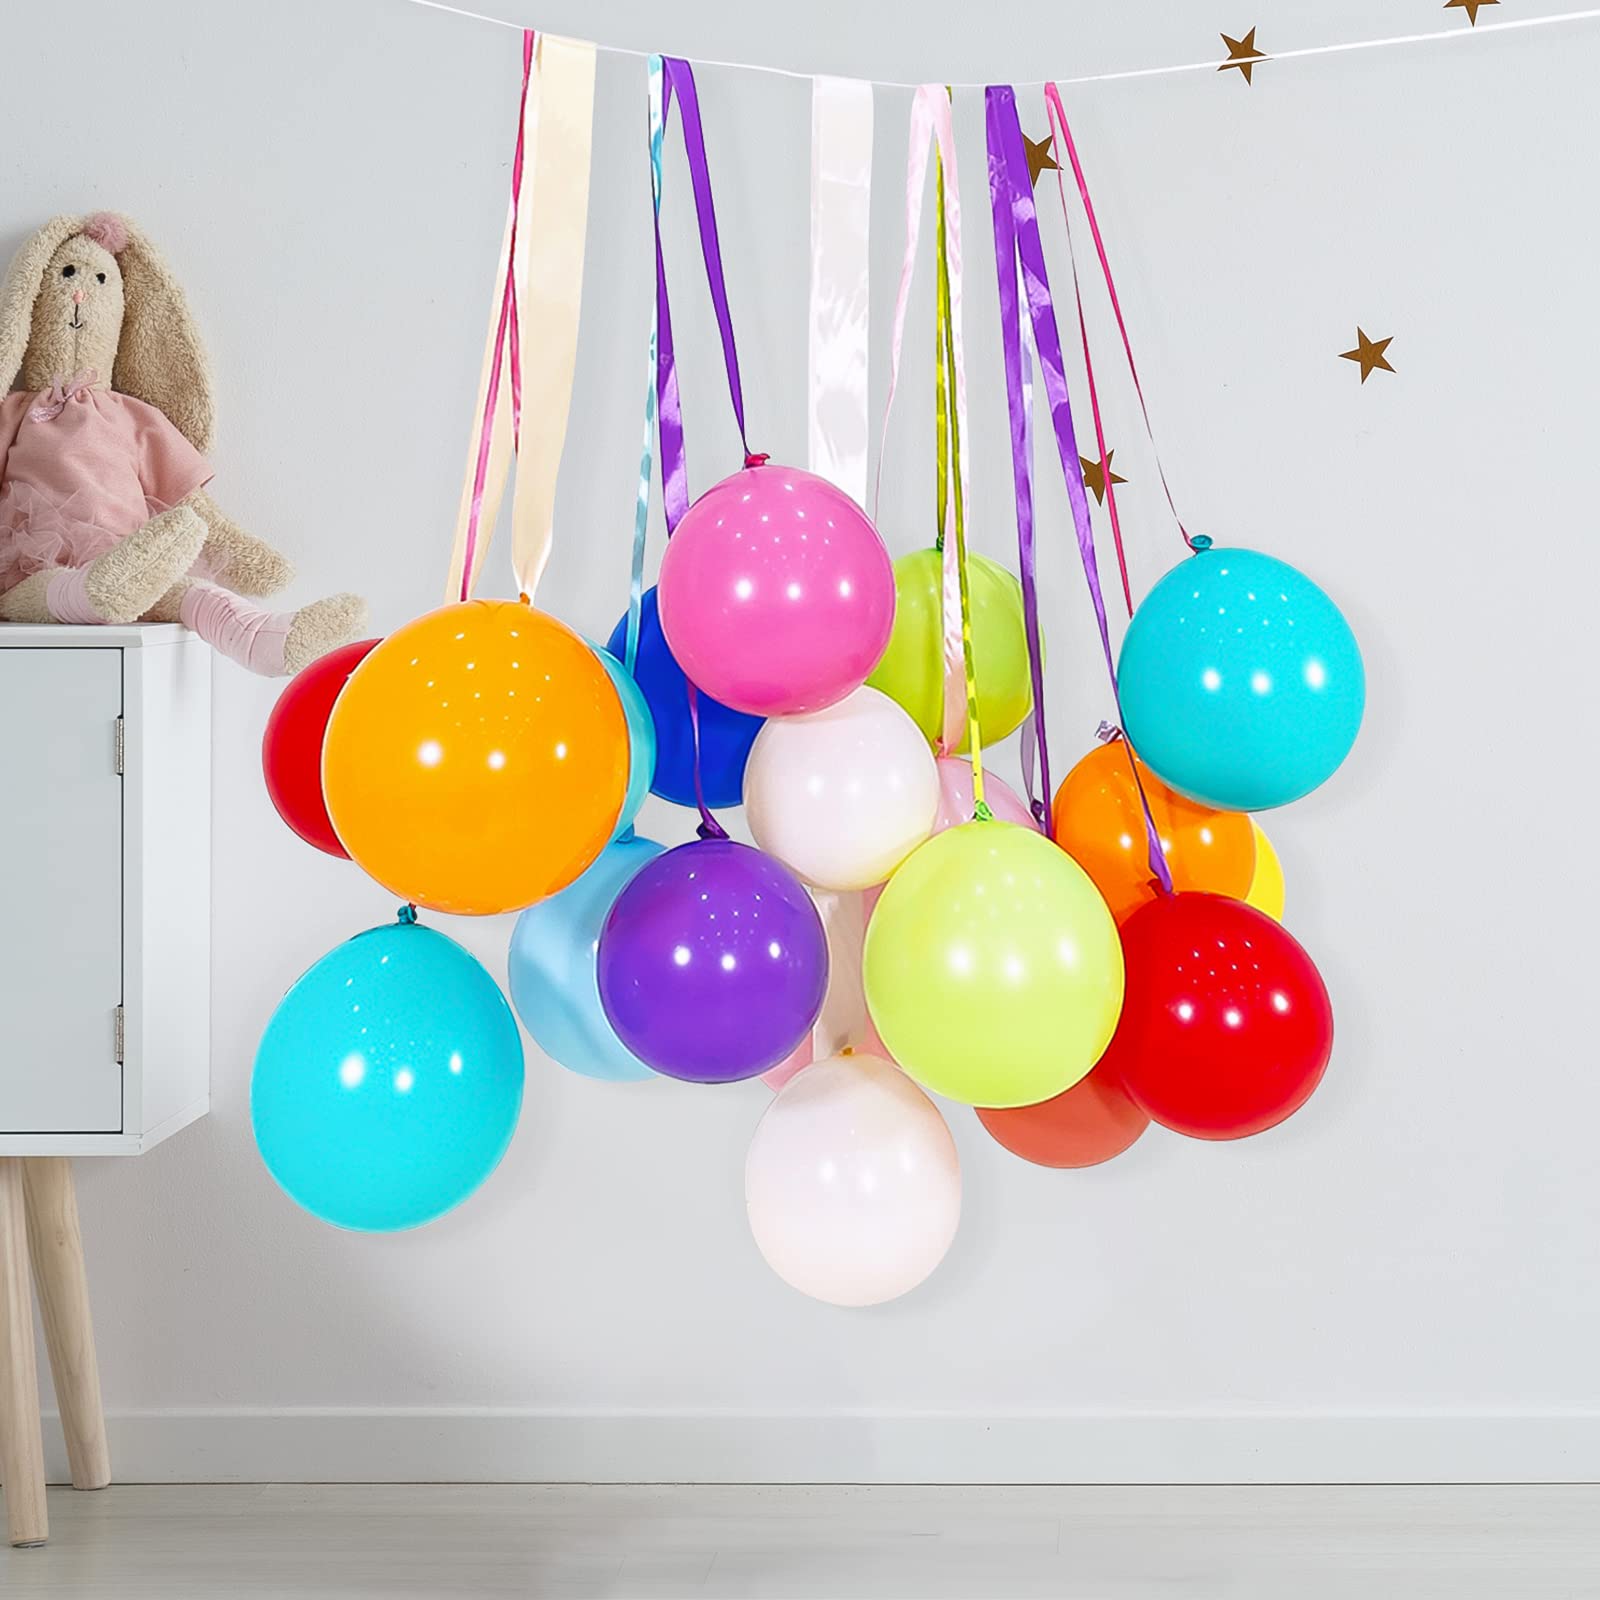 Colorful balloons and streamers